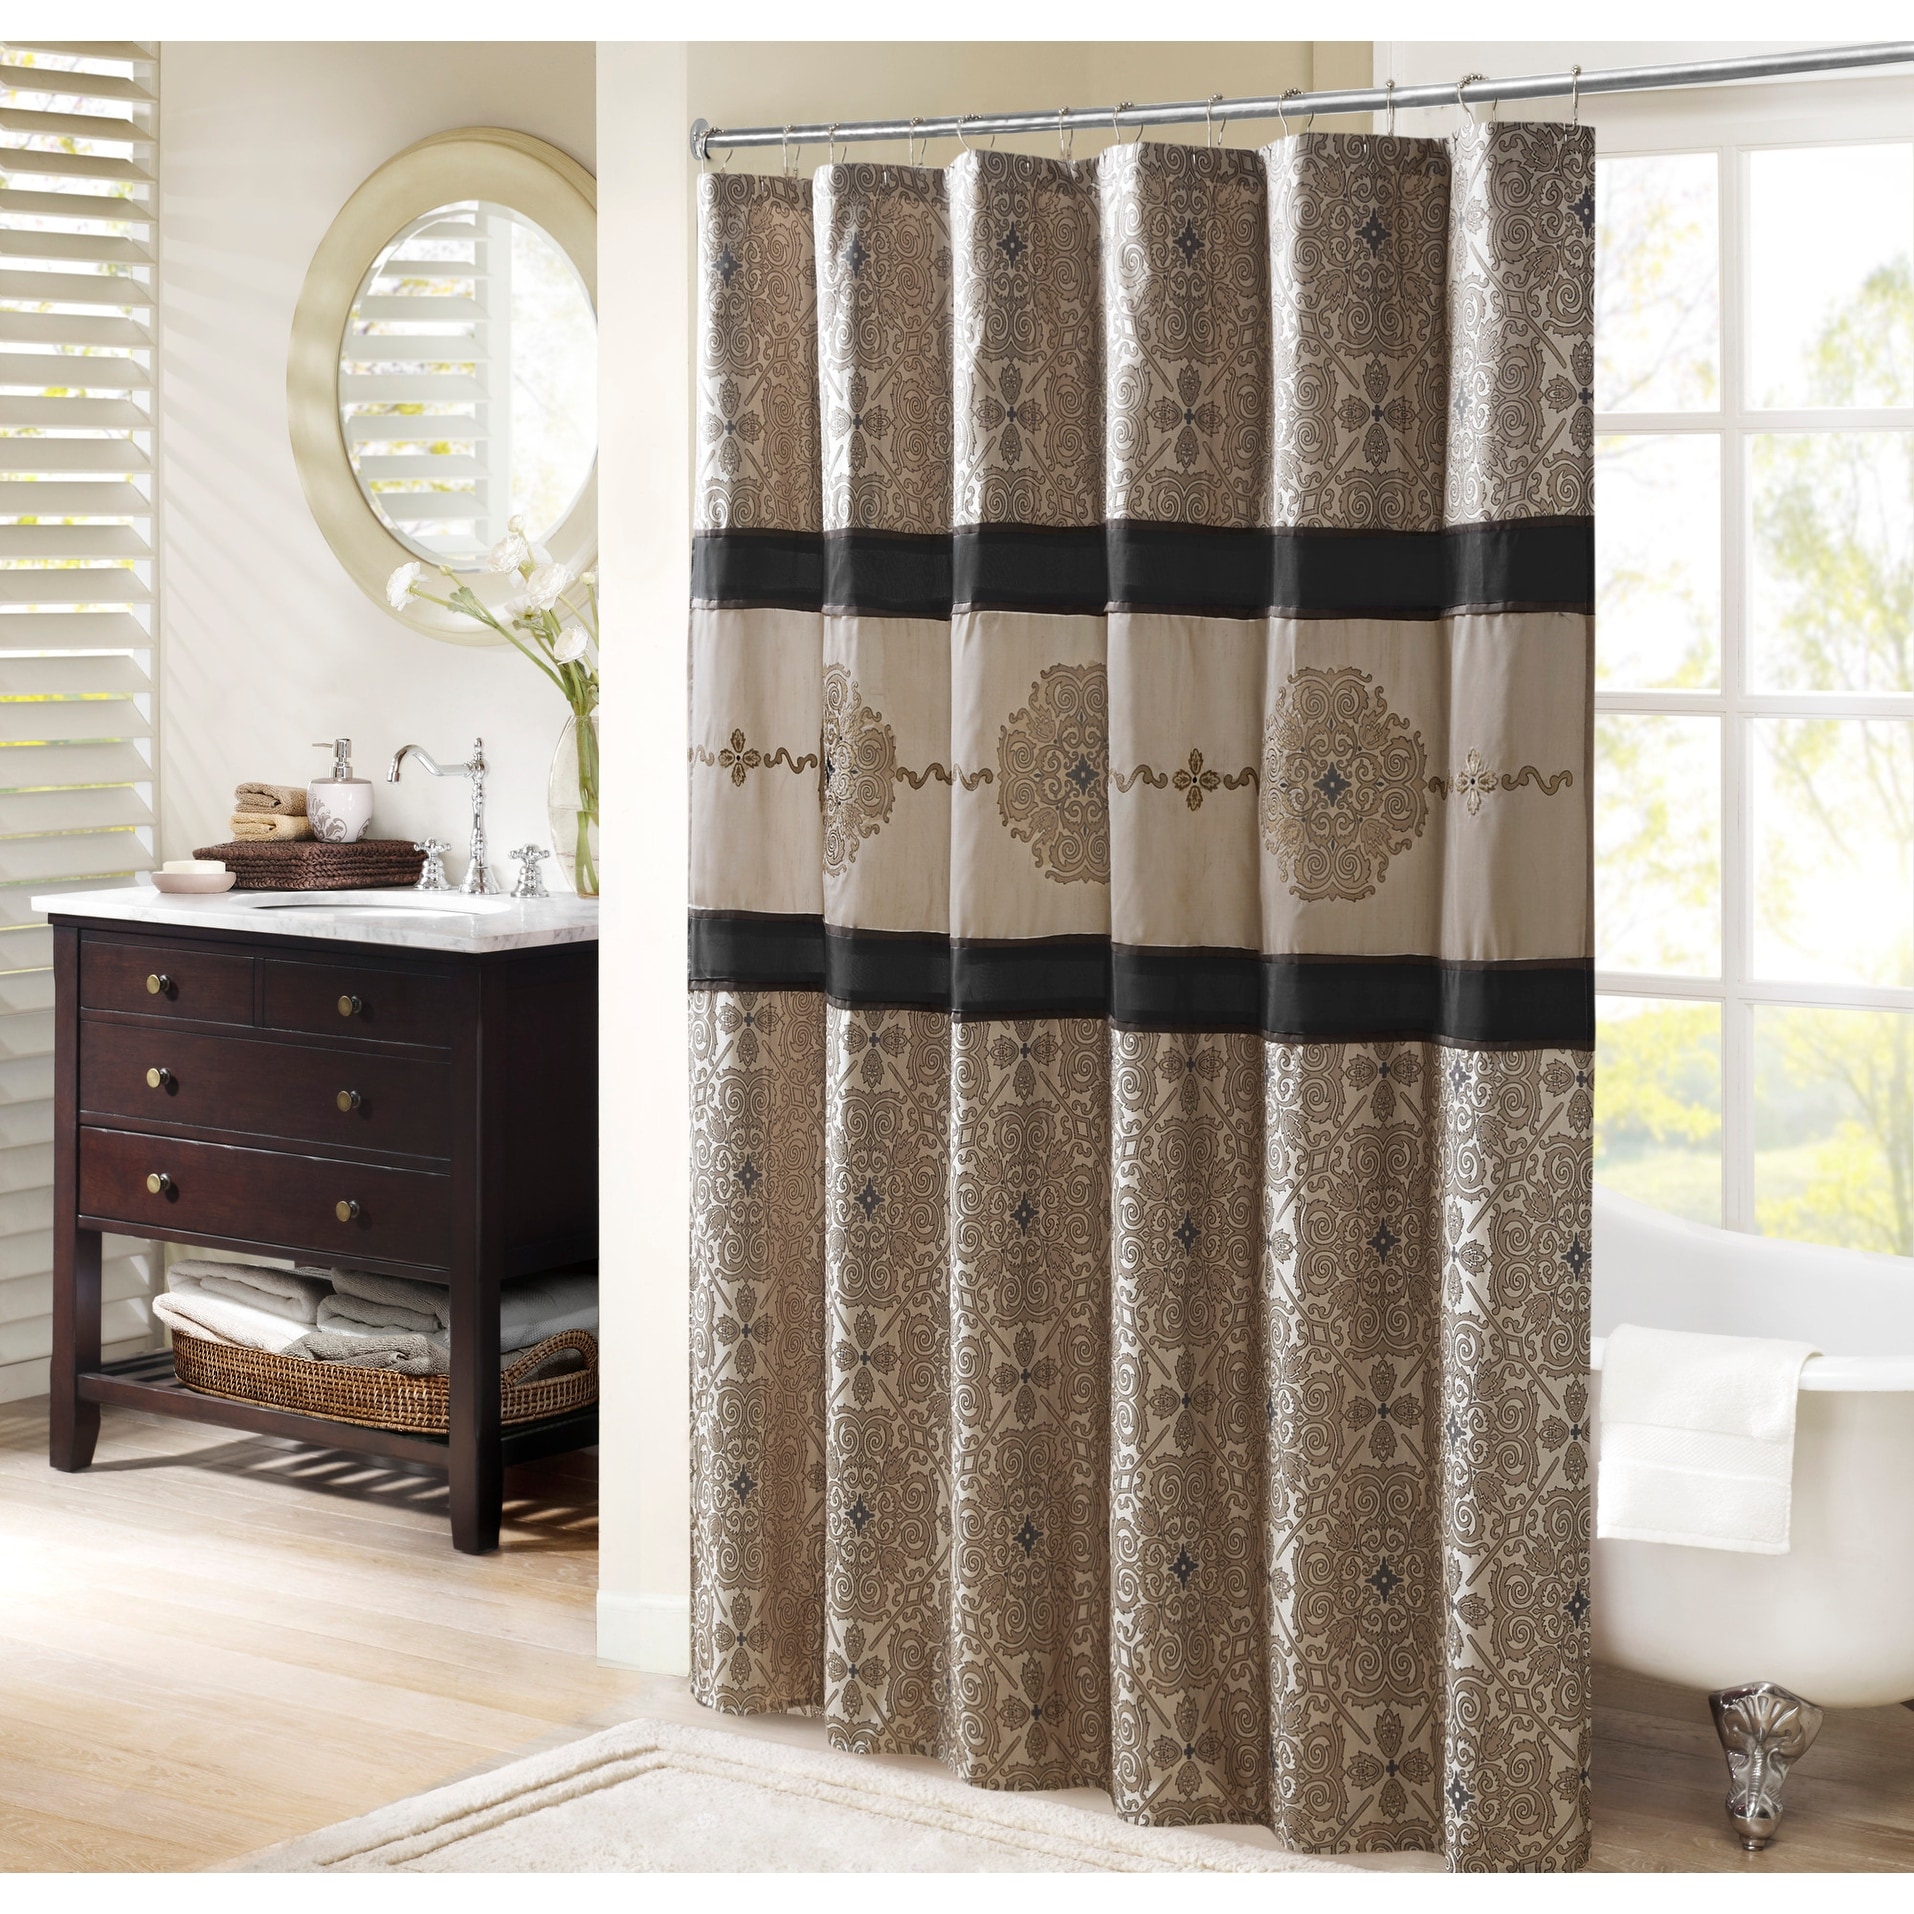 https://ak1.ostkcdn.com/images/products/is/images/direct/922f0312c3758c626ac65e611be1378c2aa65007/Madison-Park-Blaine-Embroidered-Shower-Curtain.jpg